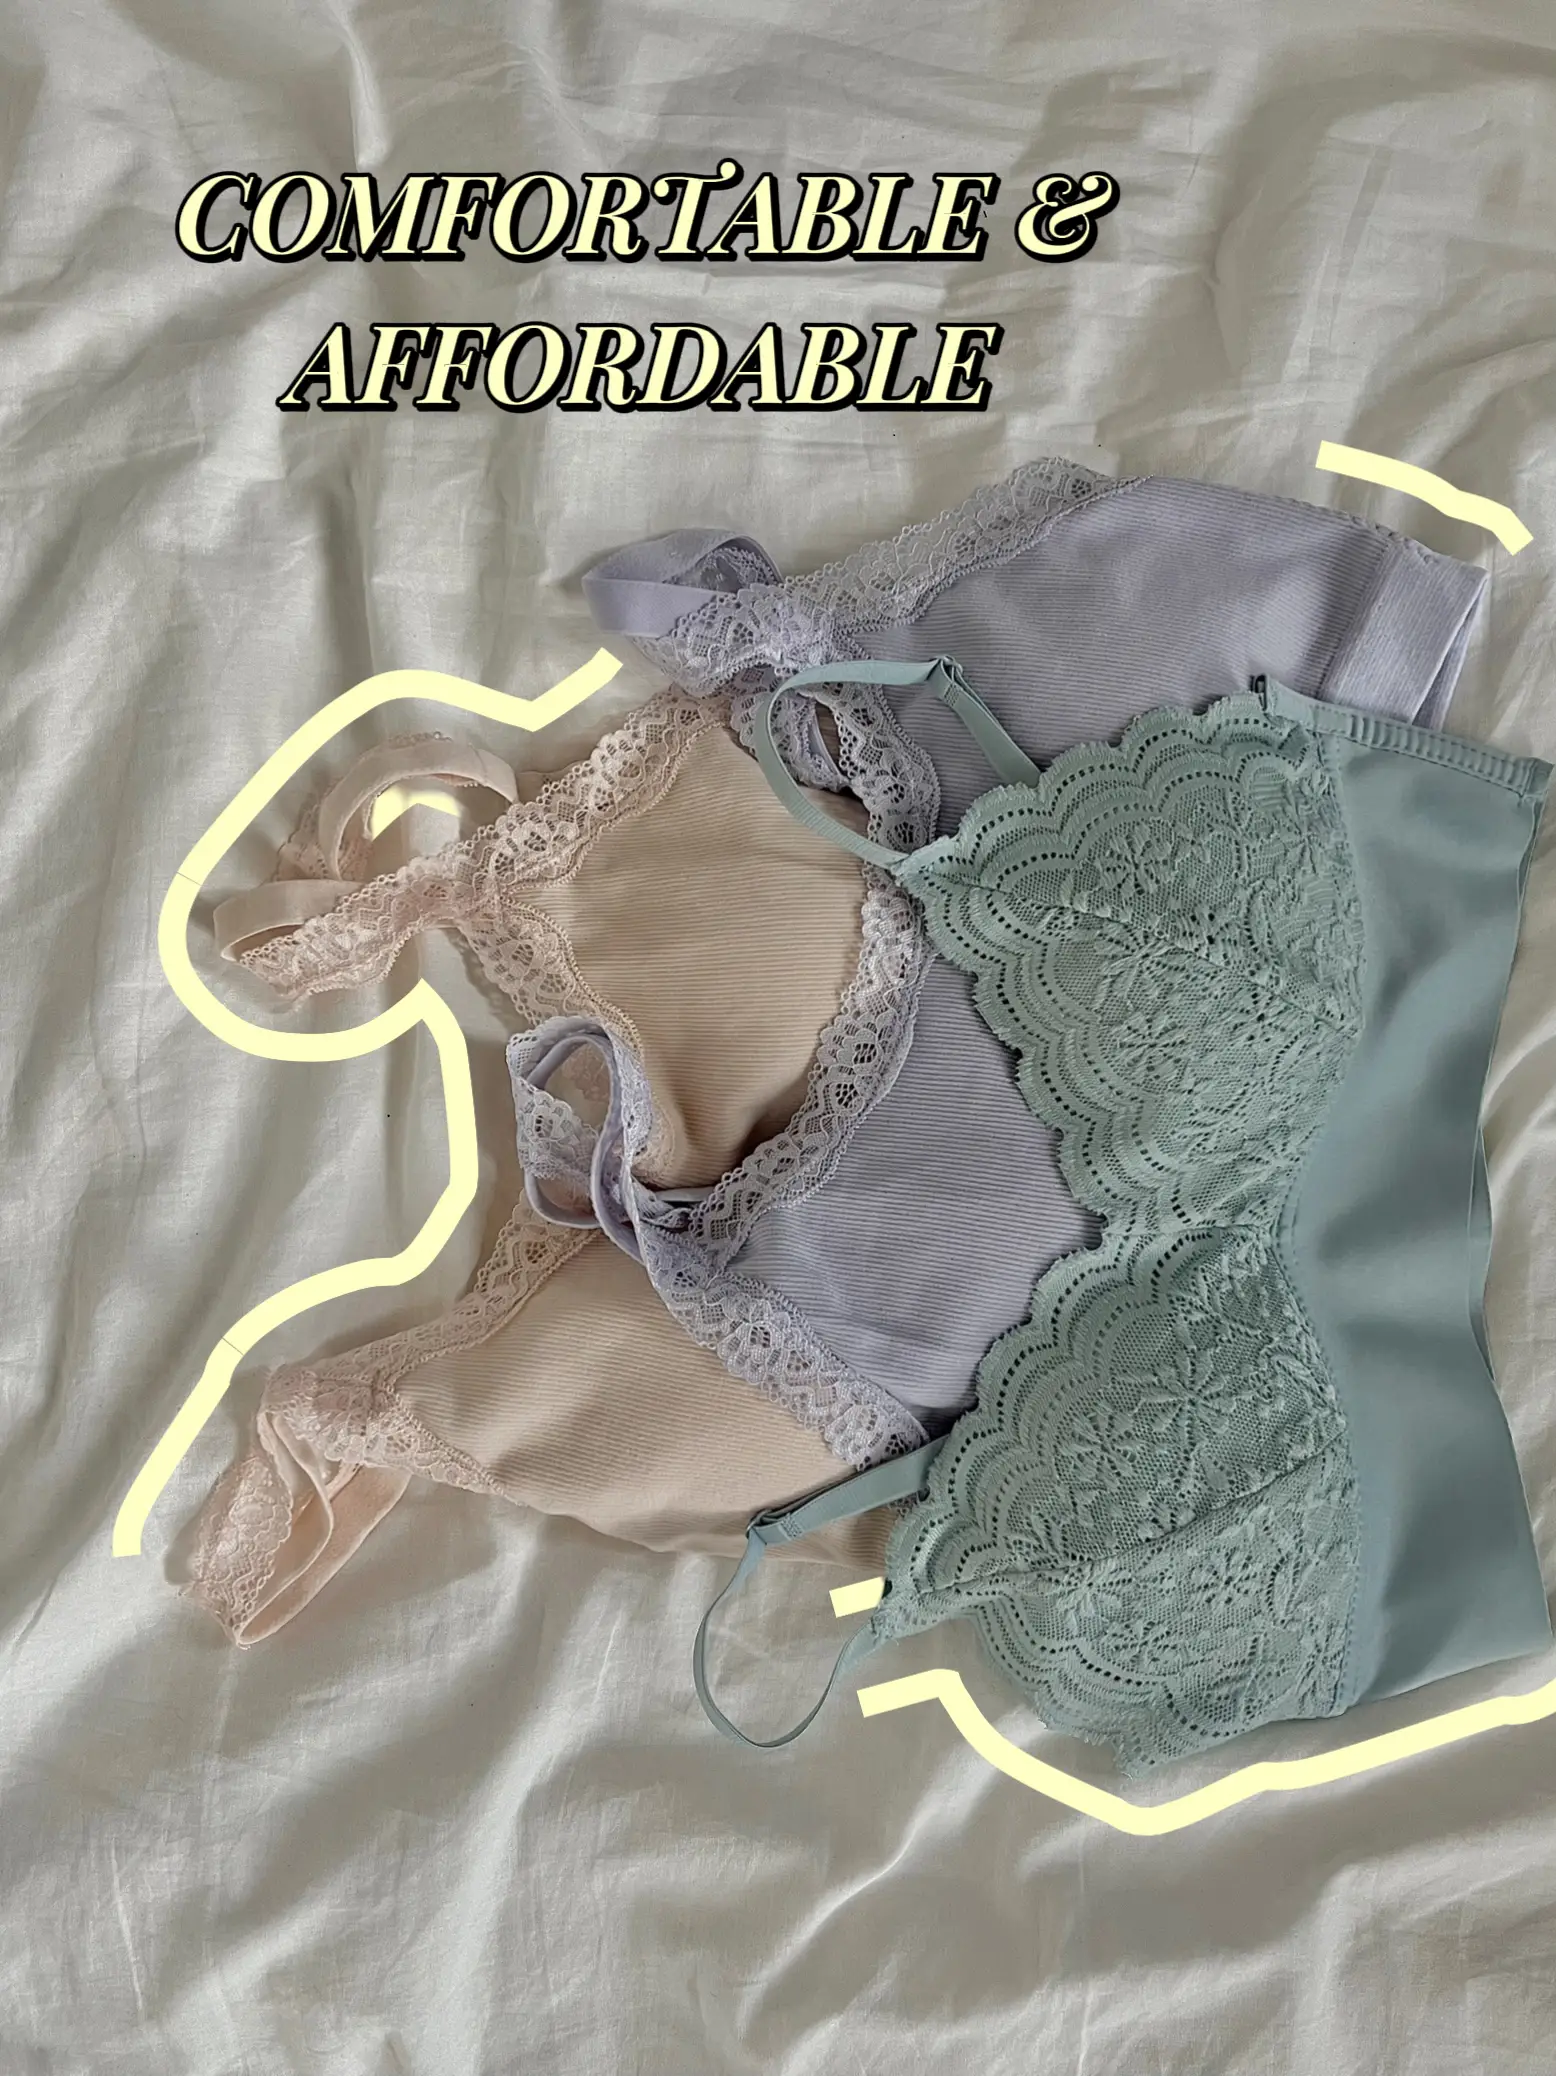 COMFORTABLE & AFFORDABLE BRAS 👙